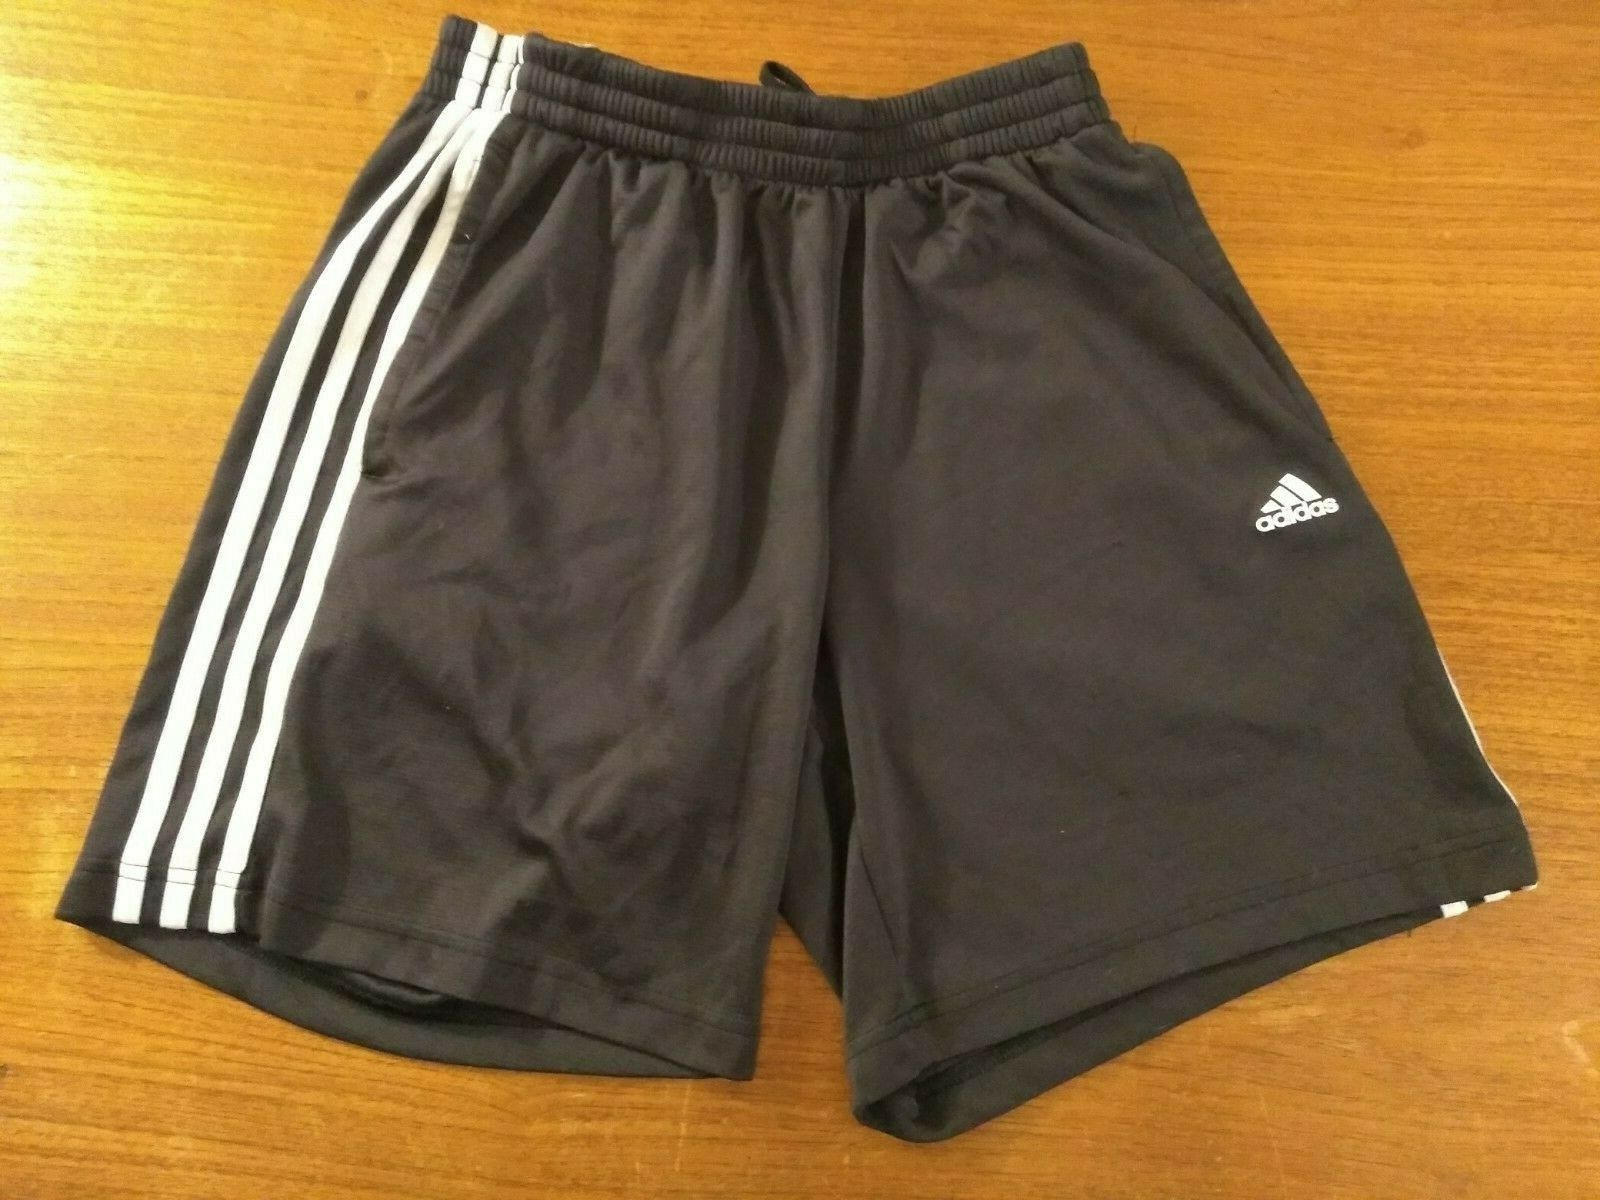 Adidas Kids Athletic Shorts Black With White Stripe Size S/l